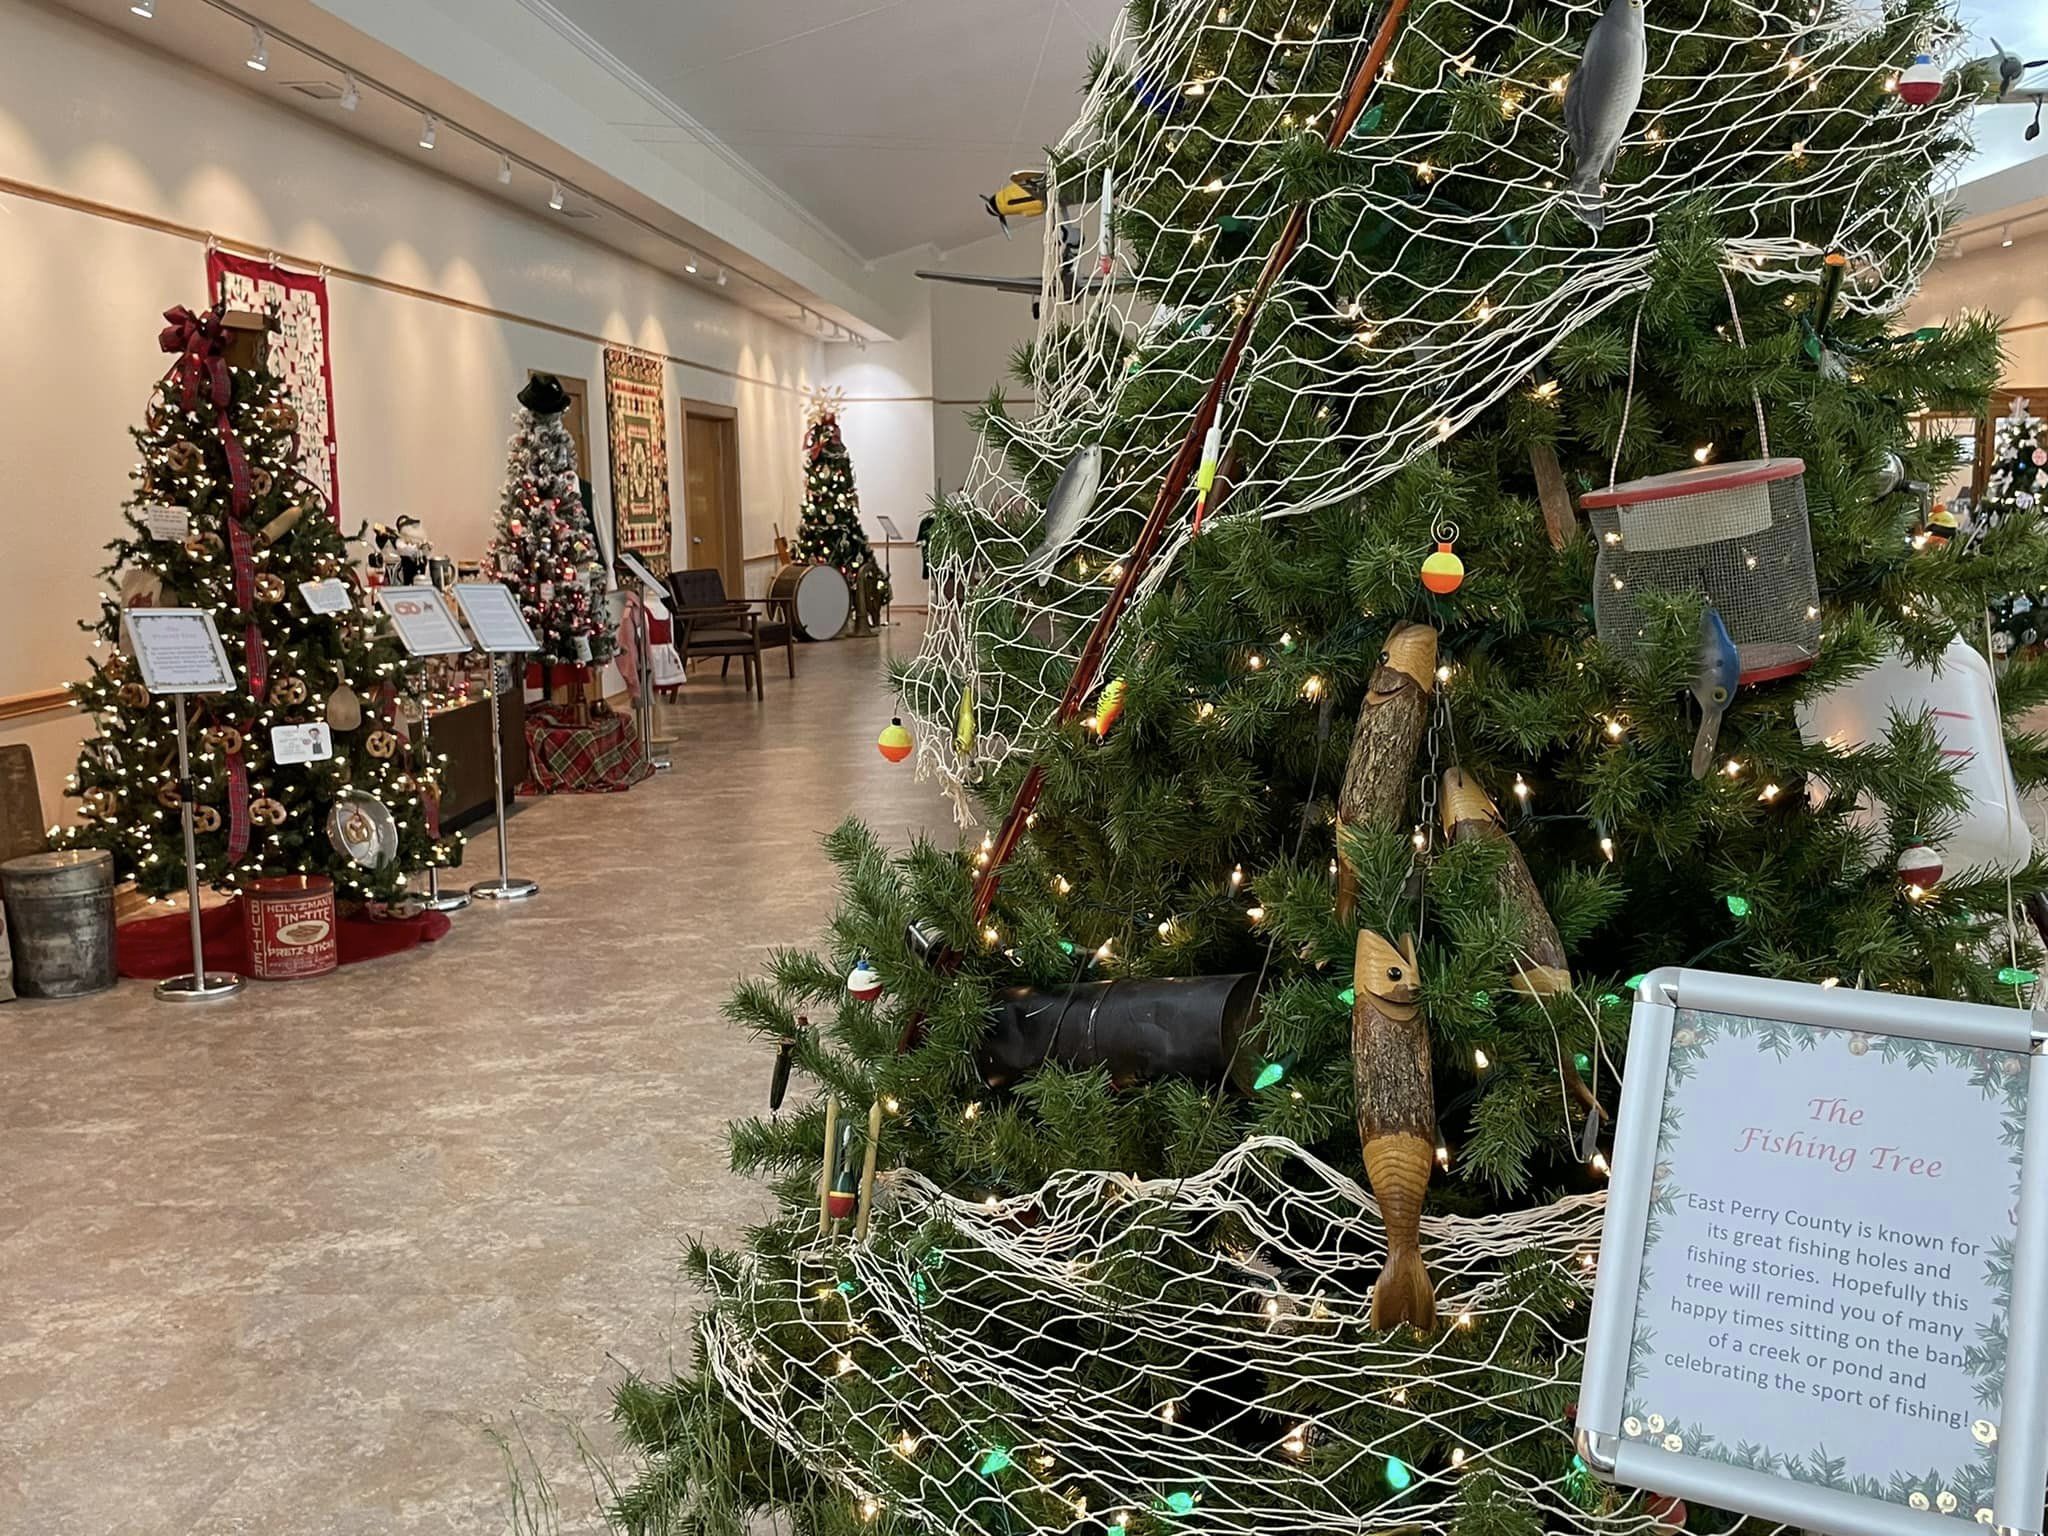 Heartland museum displays Christmas trees, quilts in holiday exhibit